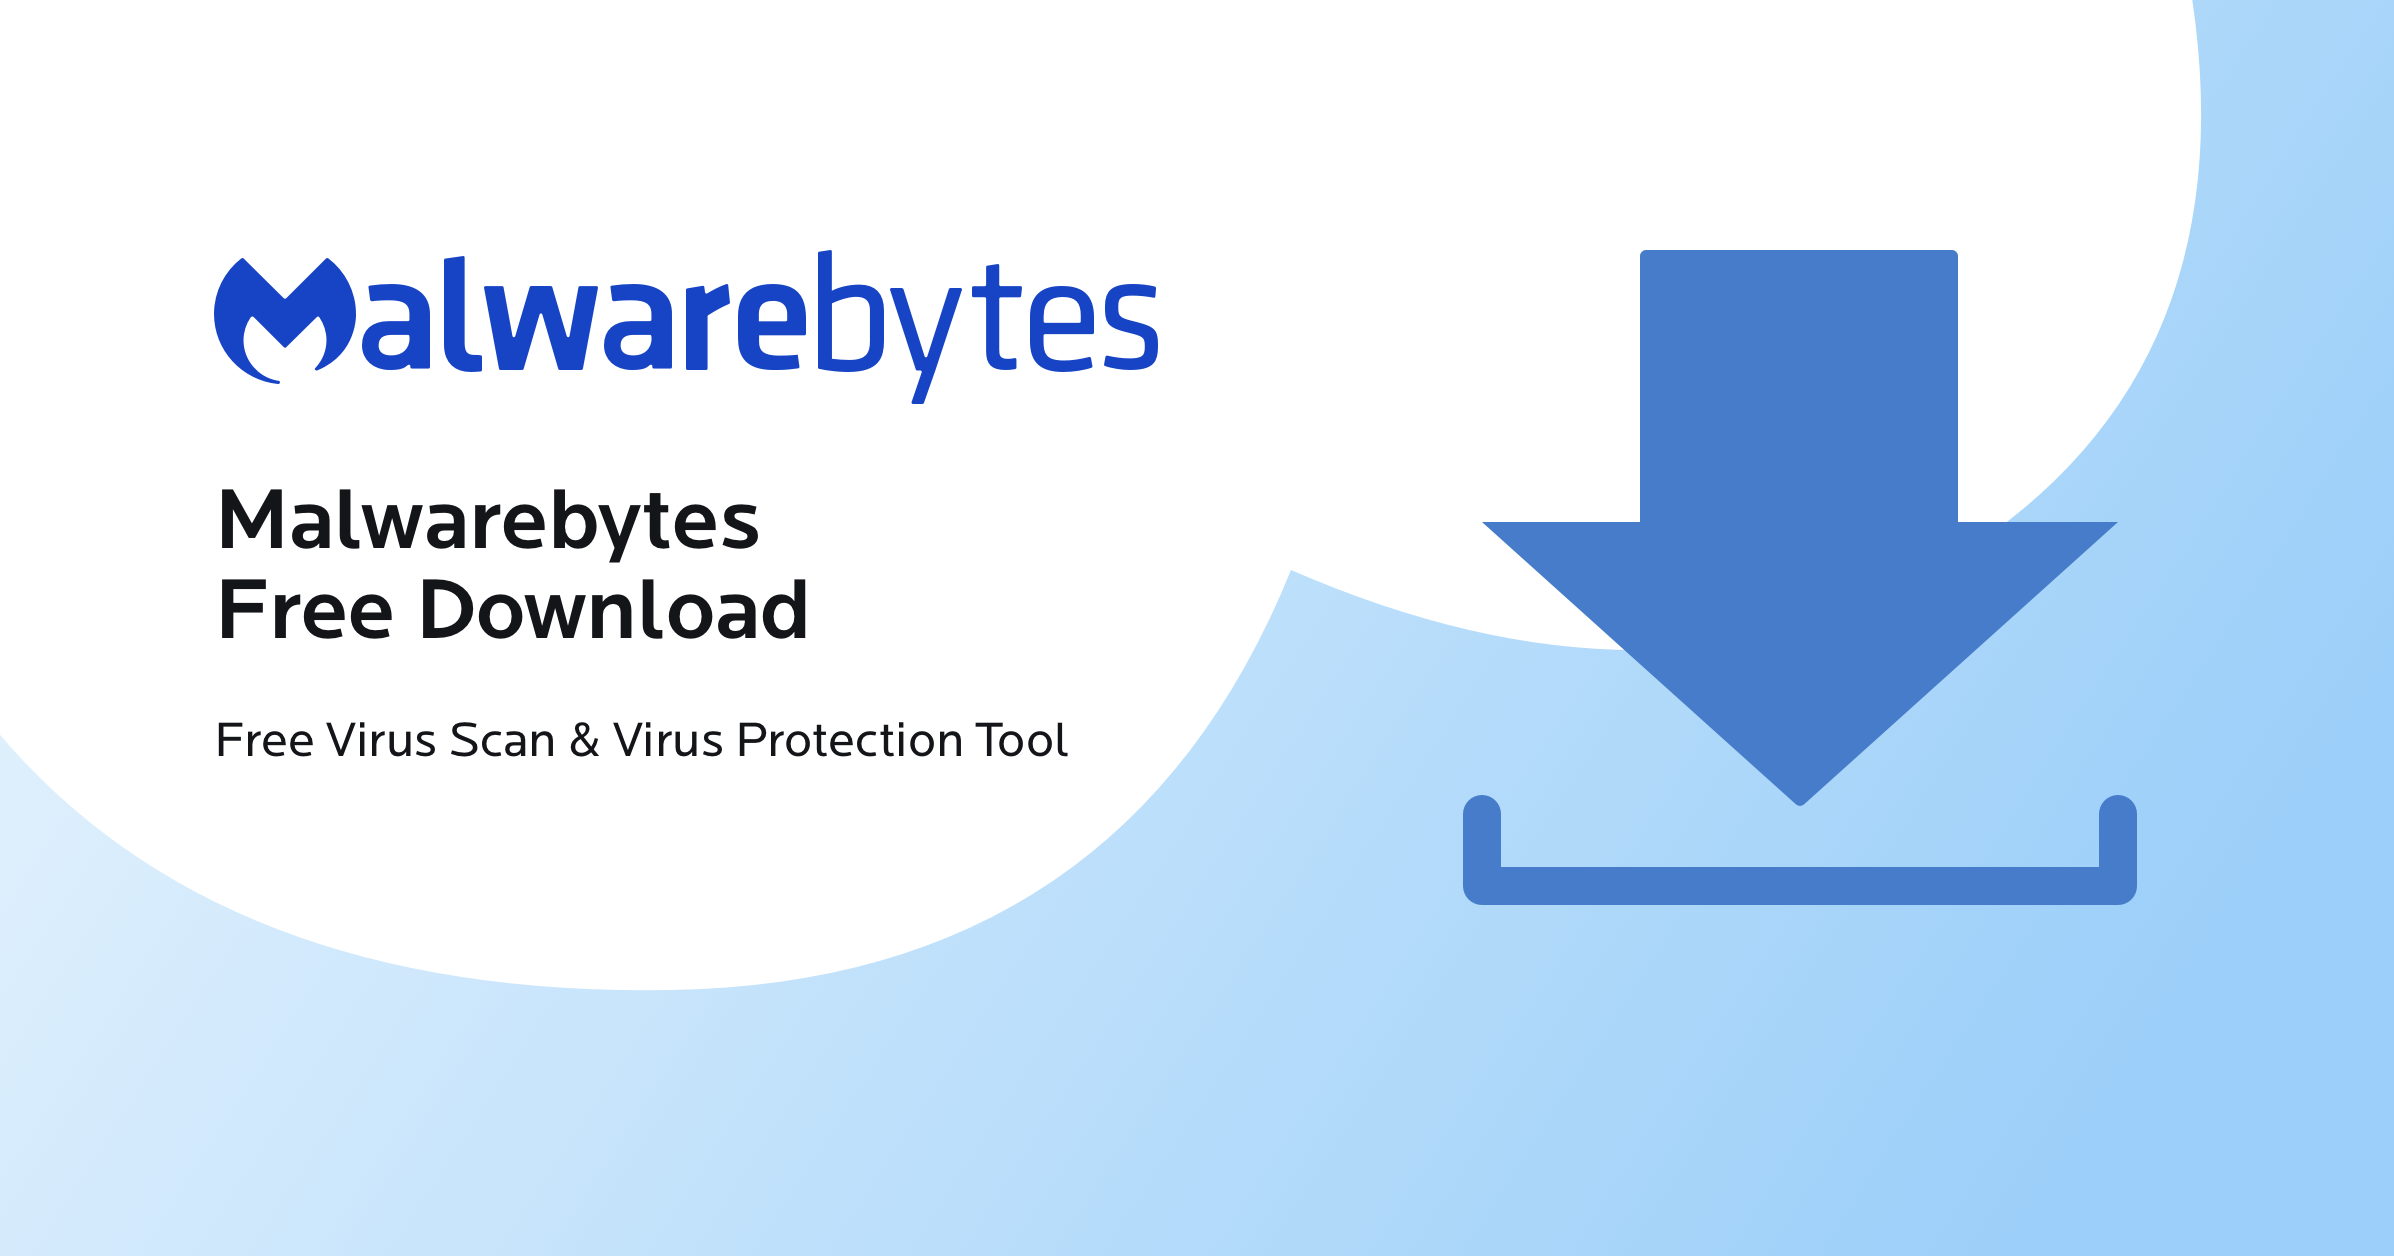 Download and install Malwarebytes from the official website
Open the program